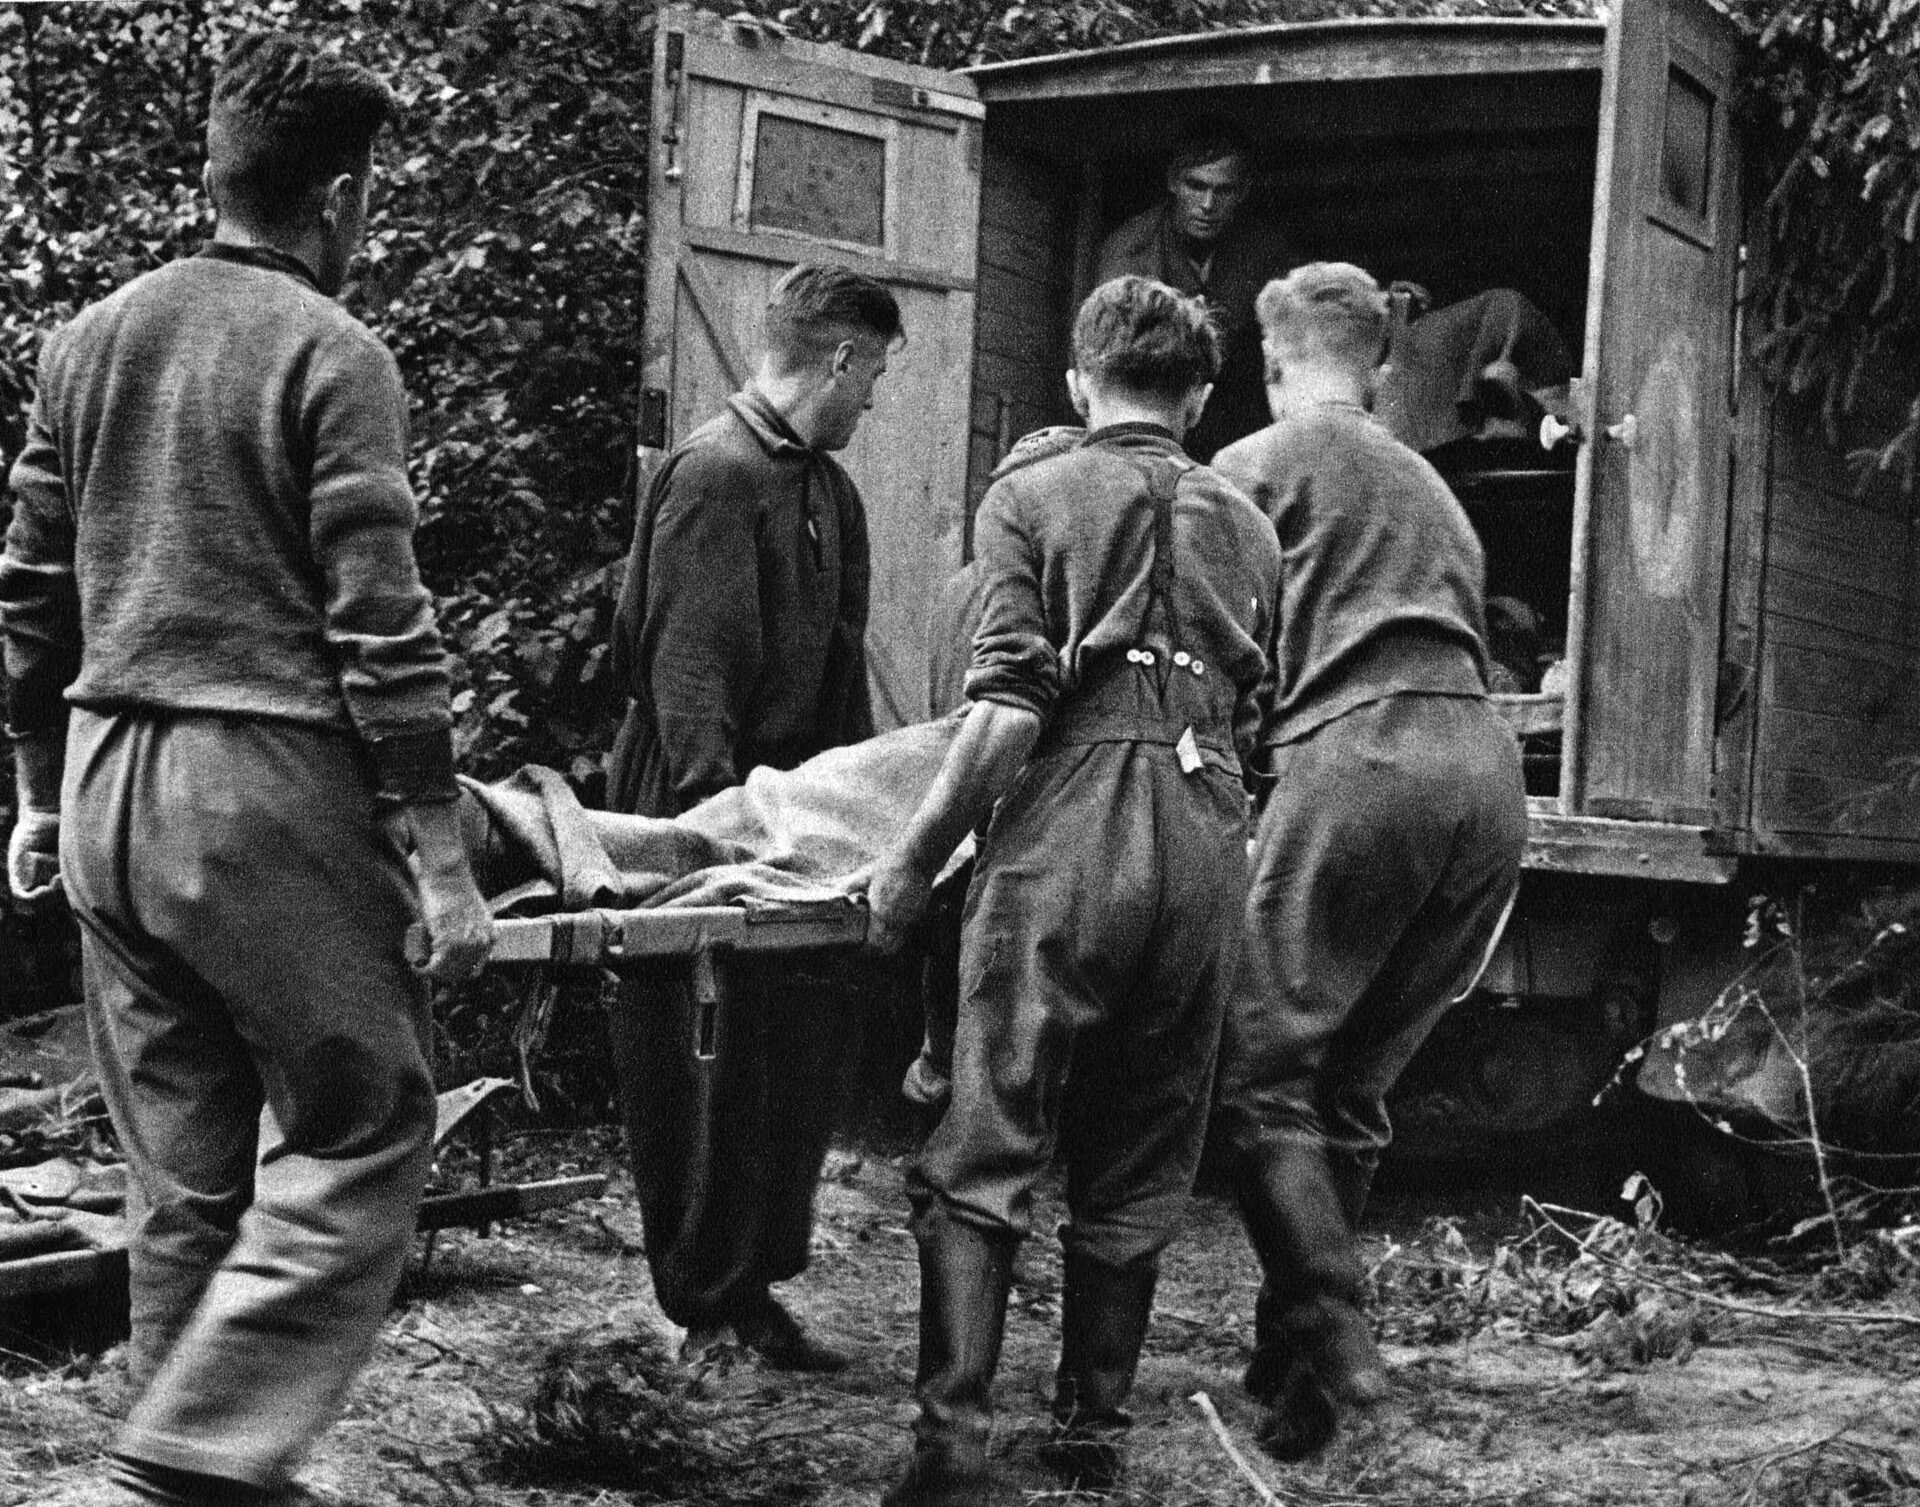 German medics load a battle casualty into a field ambulance. Heavy losses and the oncoming brutal winter weather would halt the German advance short of Moscow. 